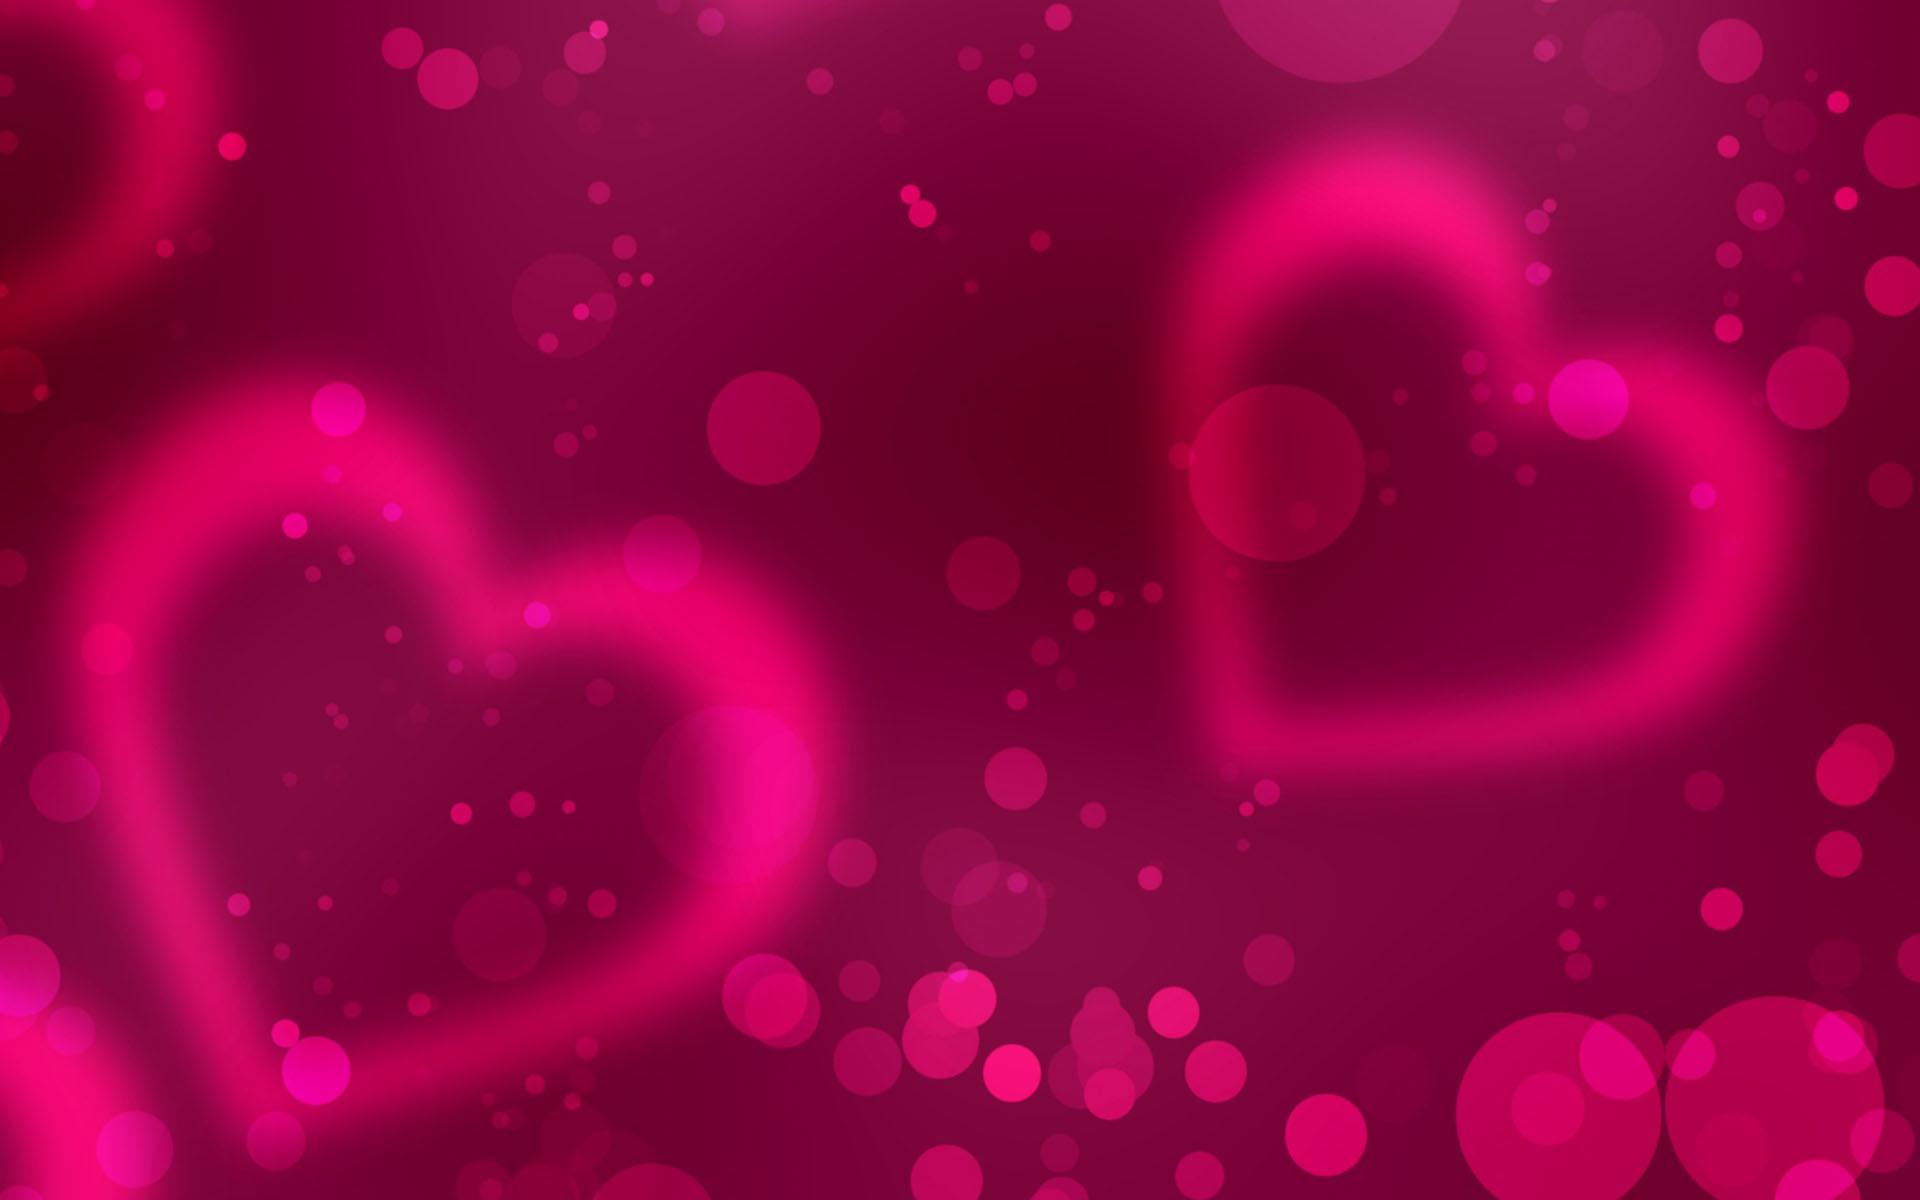 live wallpaper photo gallery,pink,heart,red,purple,magenta